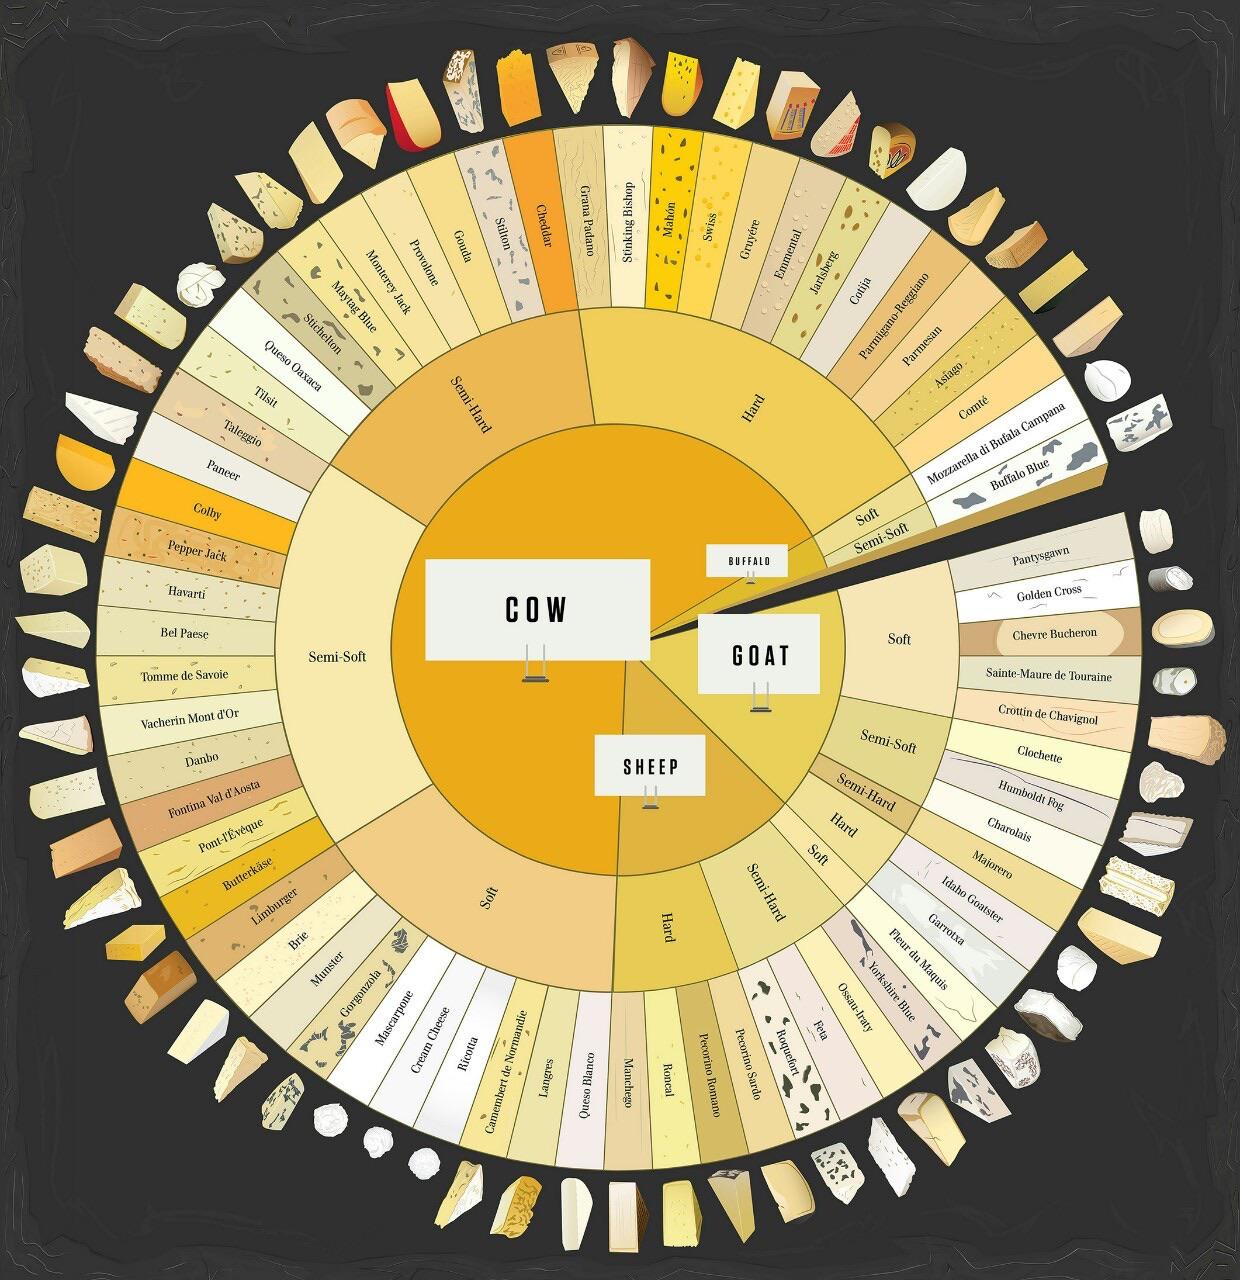 A cool guide for types of cheese and there source